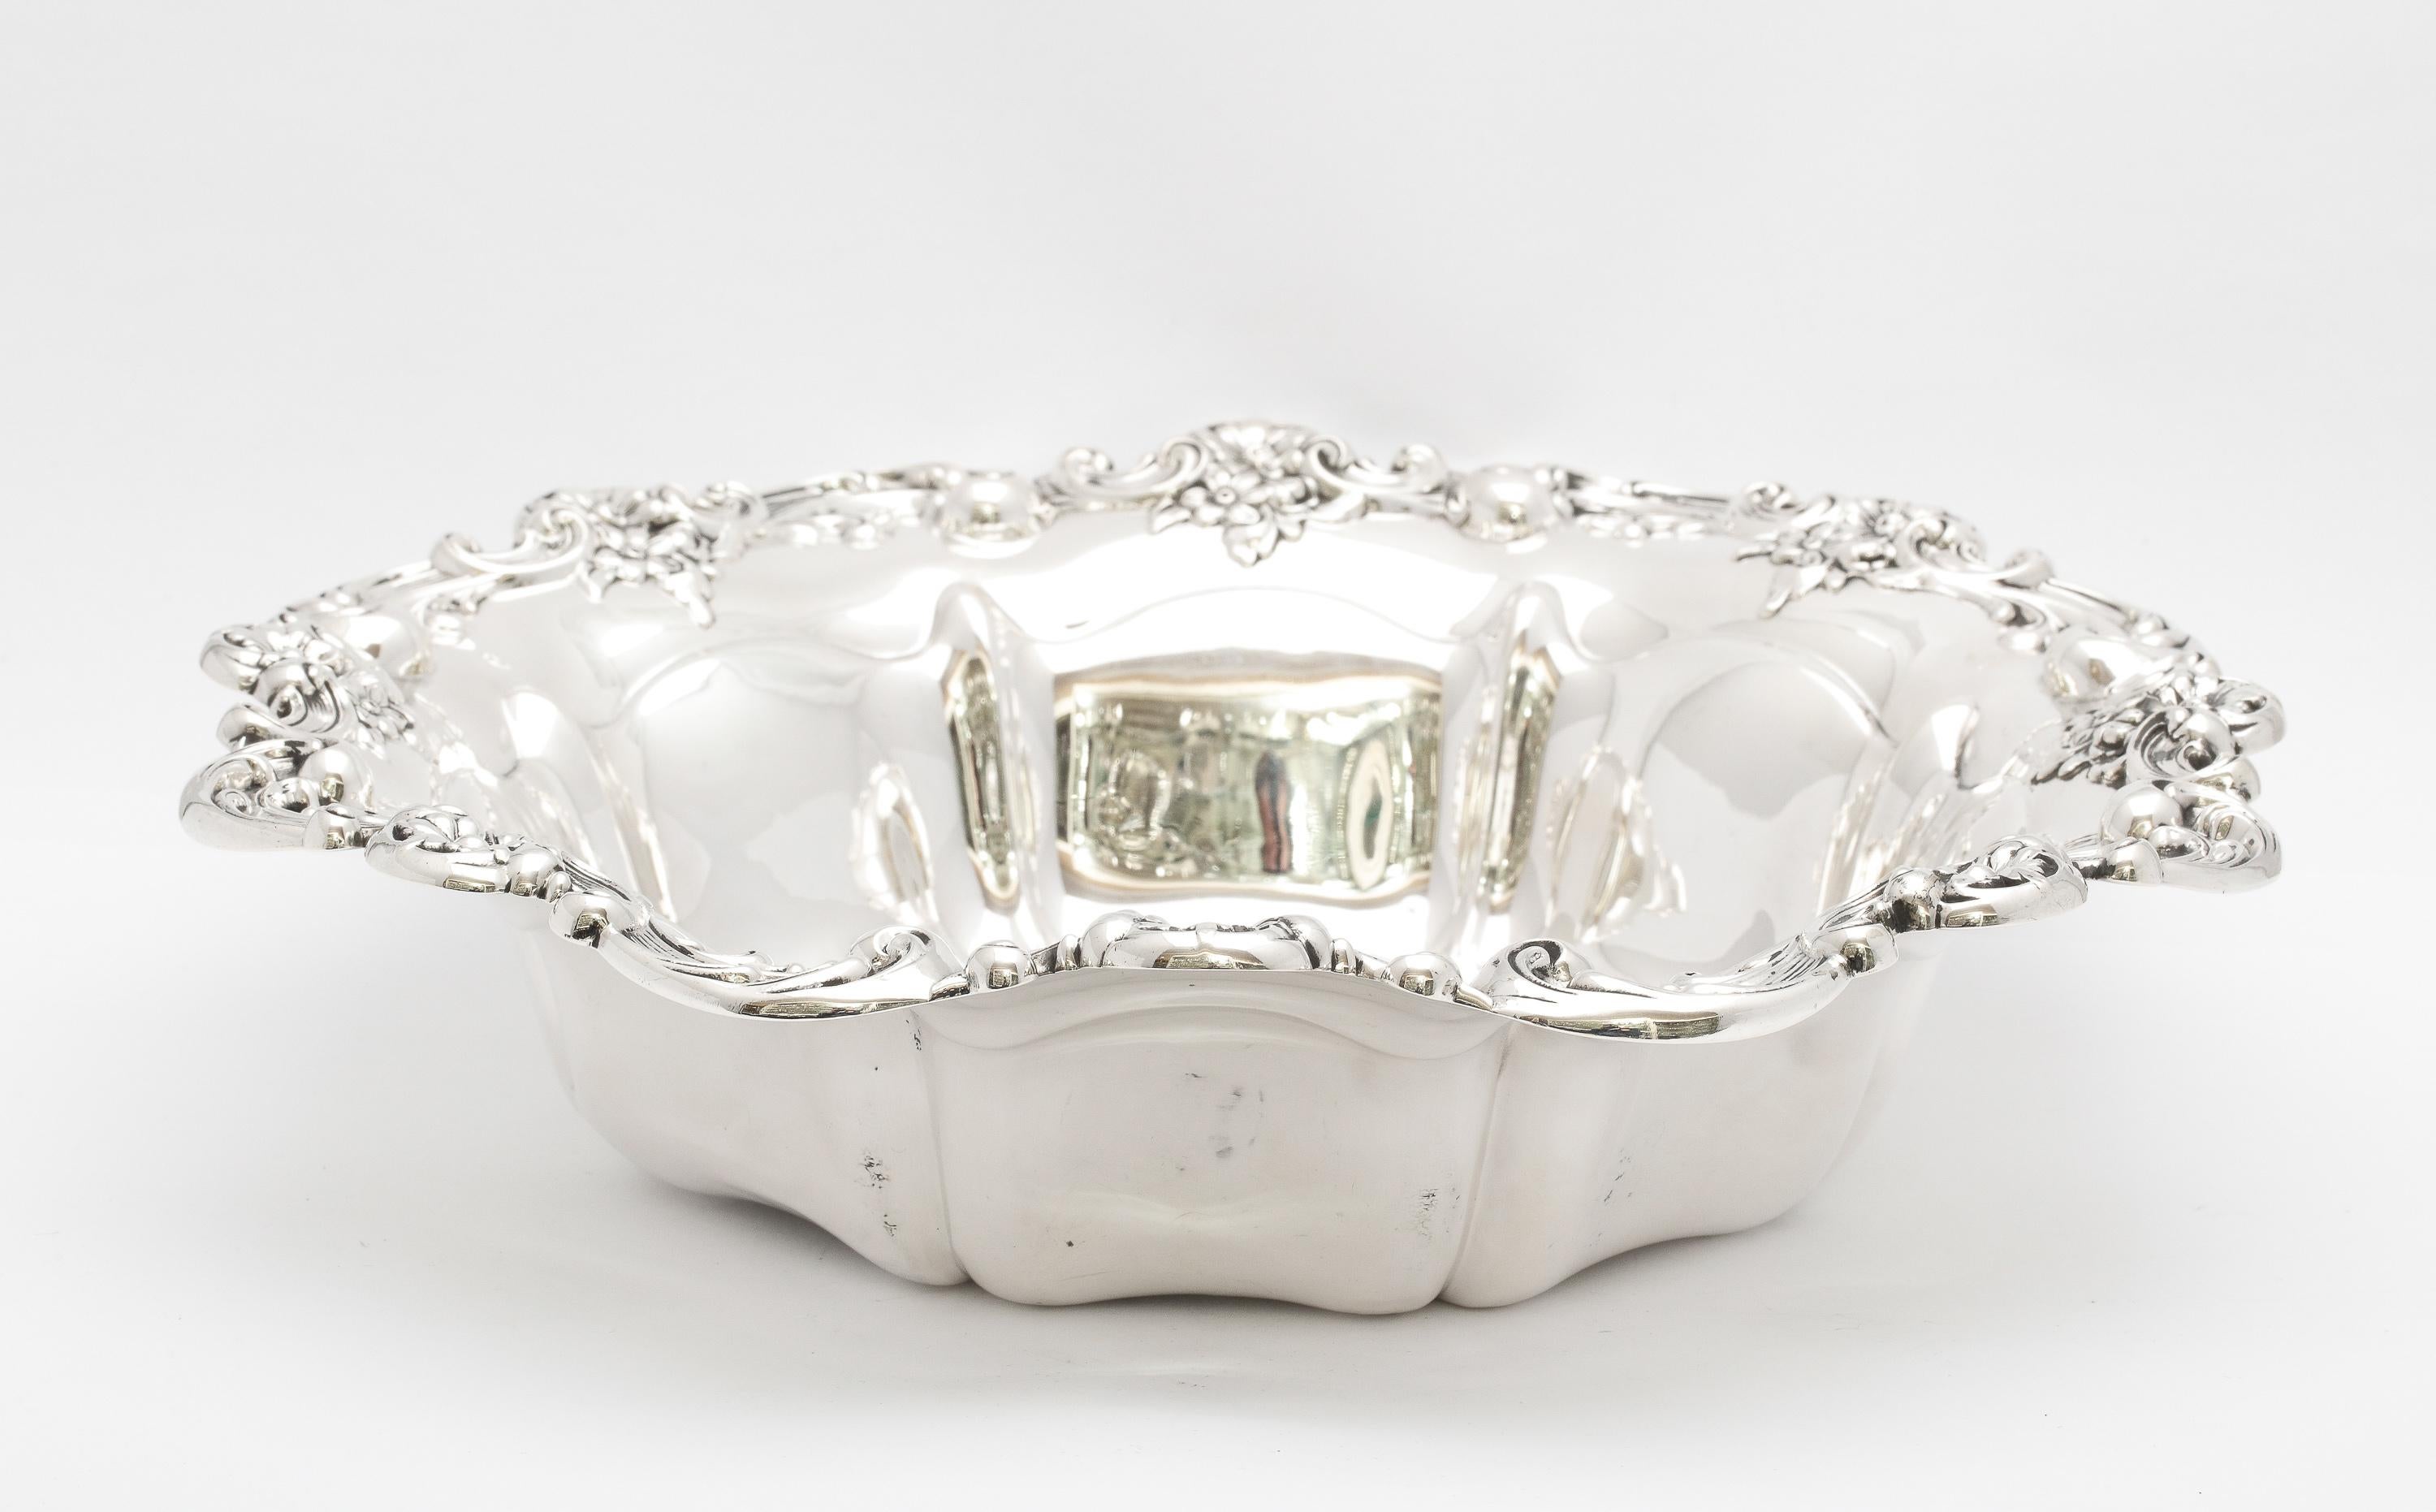 Beautiful Victorian-Style Sterling Silver Centerpiece Bowl By Gorham In Good Condition For Sale In New York, NY